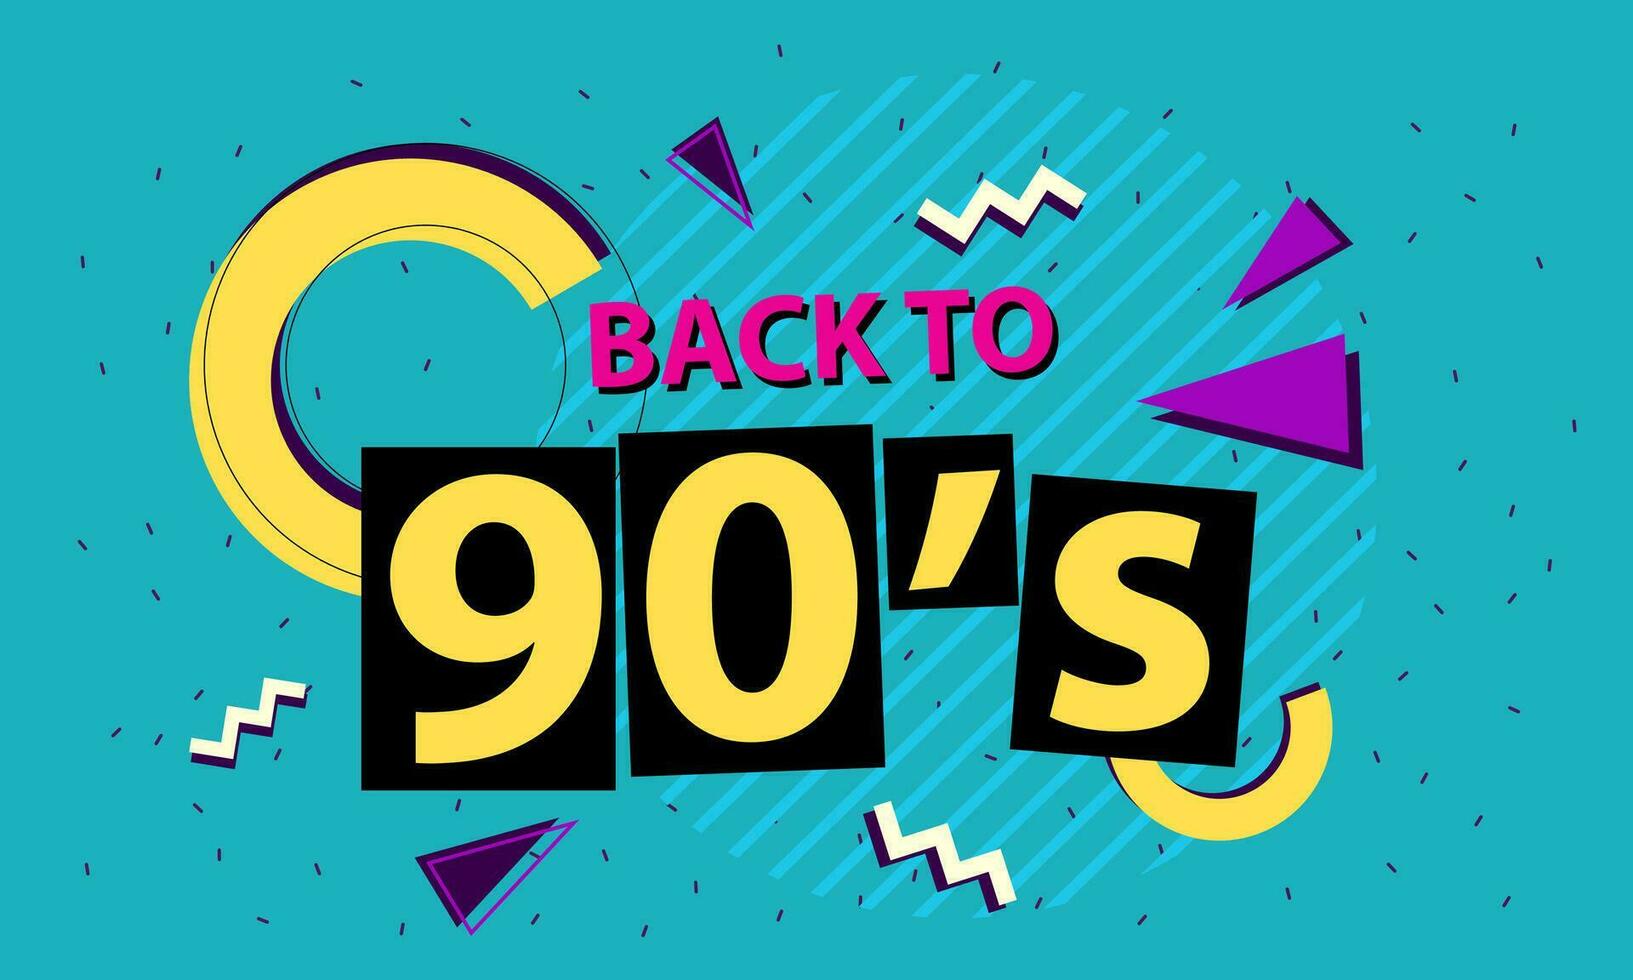 90s retro posters. Back in the 90s, 90s style background banner. Vector illustration